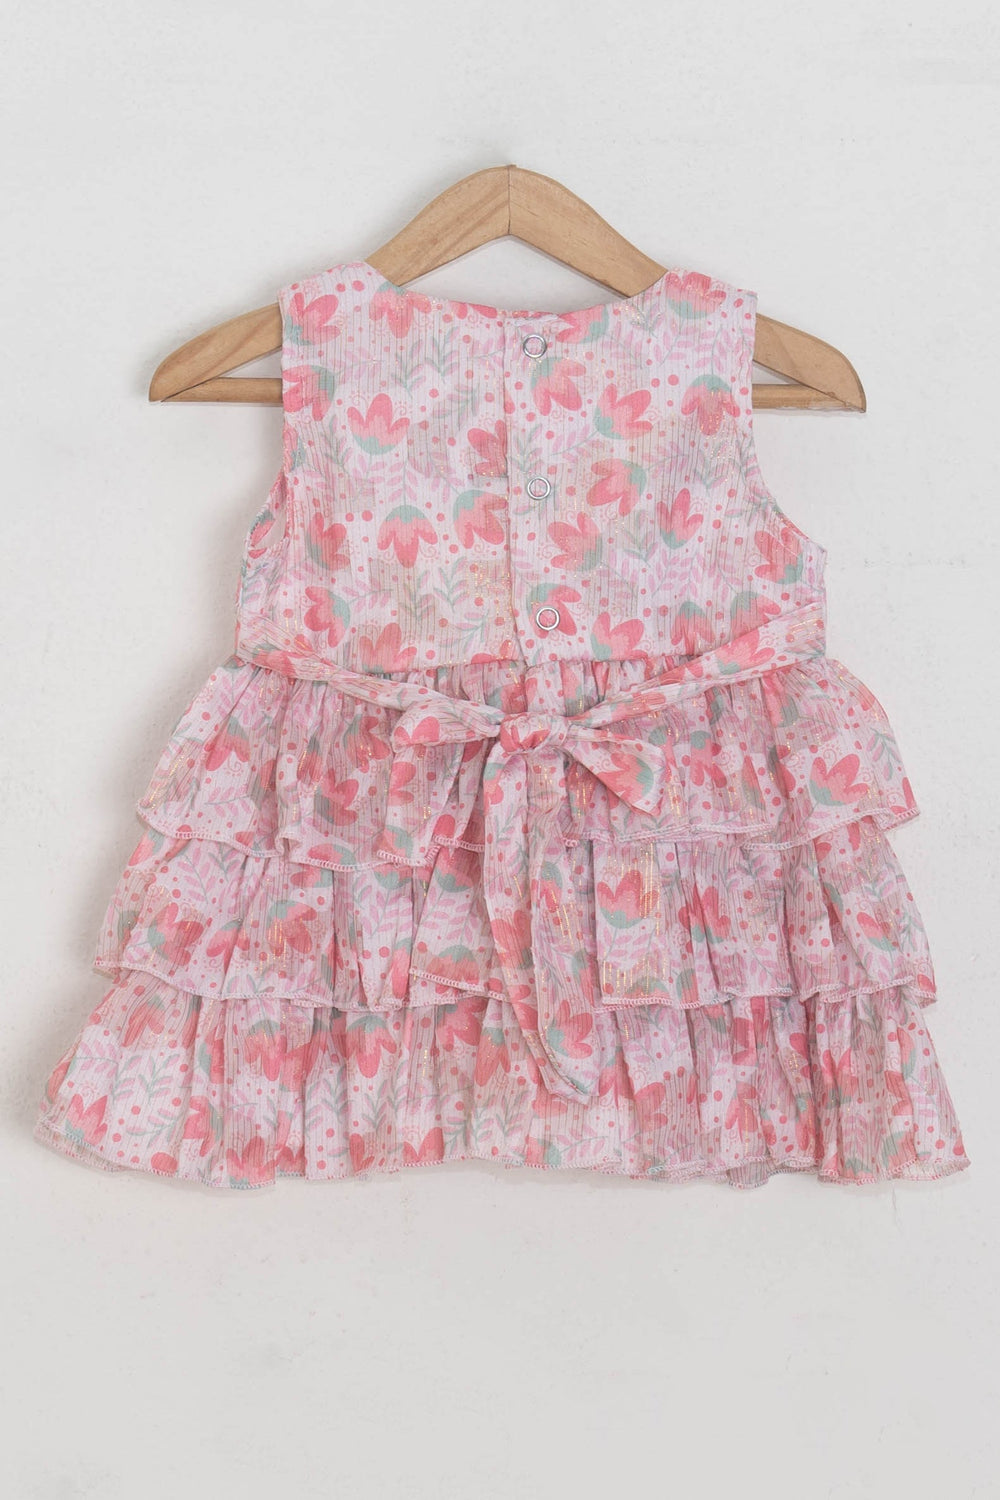 The Nesavu Baby Fancy Frock Lovely Pink Floral Printed Sleeveless Layer Frock With Bow Appliques For Girls Nesavu Party wear cotton frocks for babies | Ethnic Wear For Girls | The Nesavu